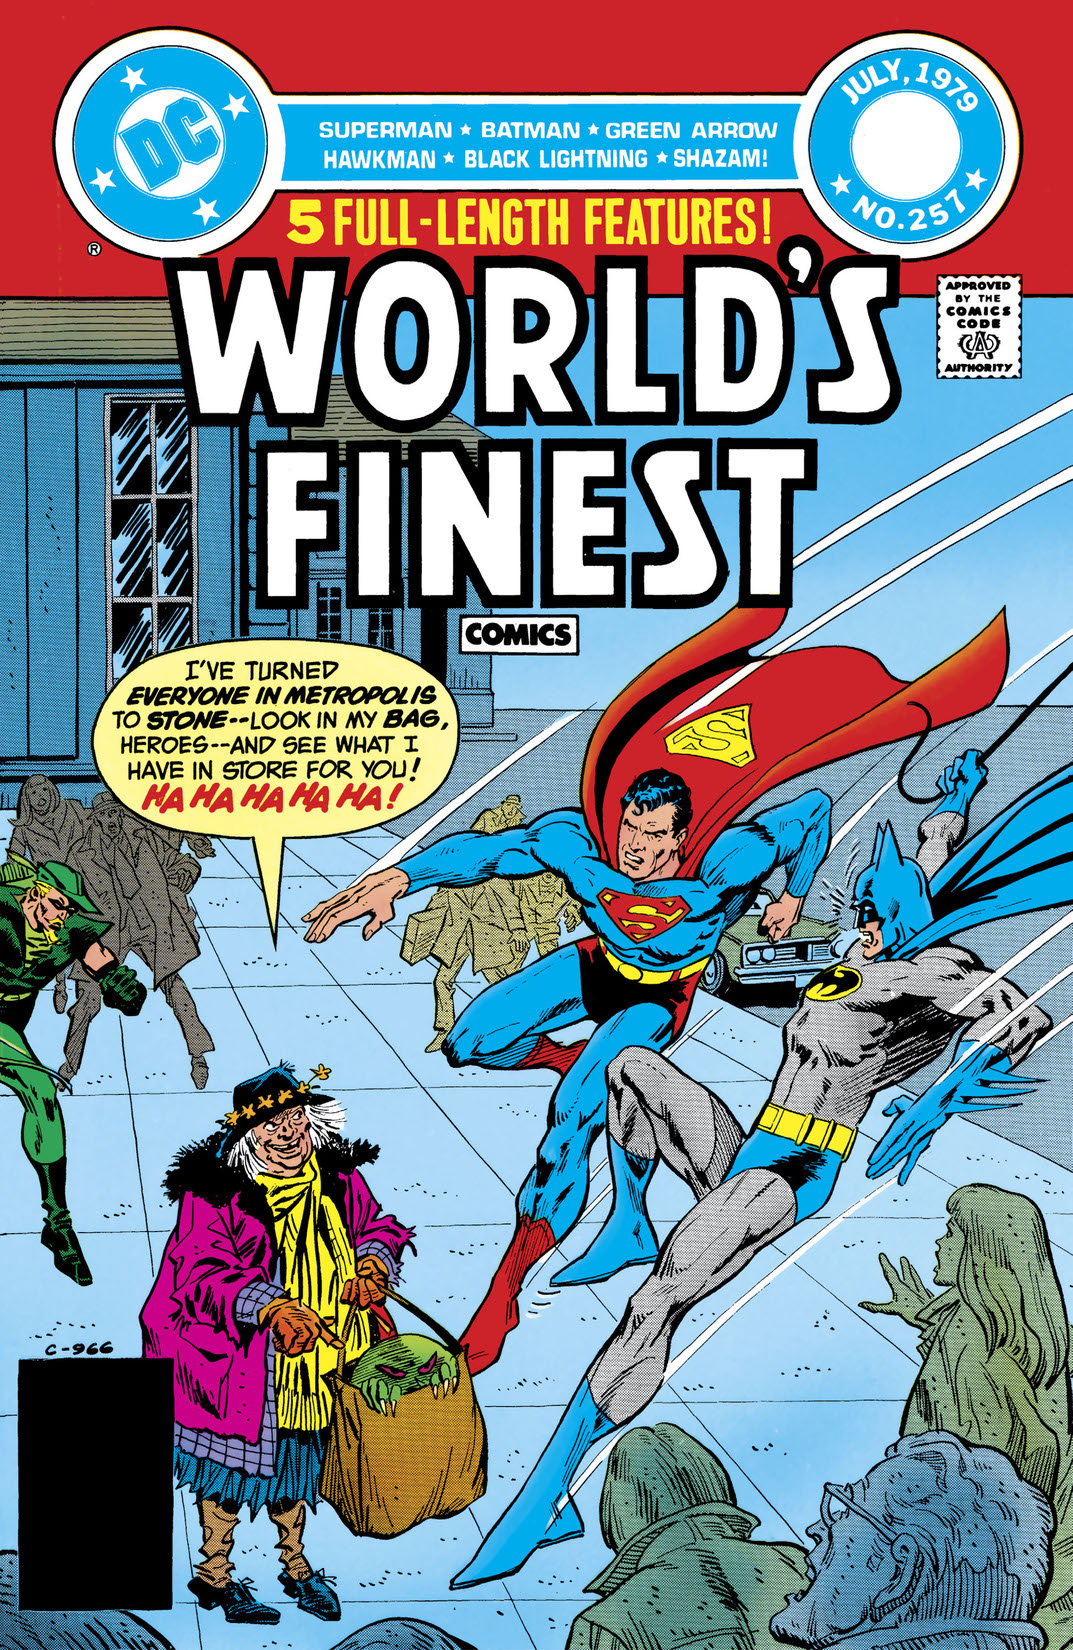 World's Finest Comics (1941-) #257 preview images